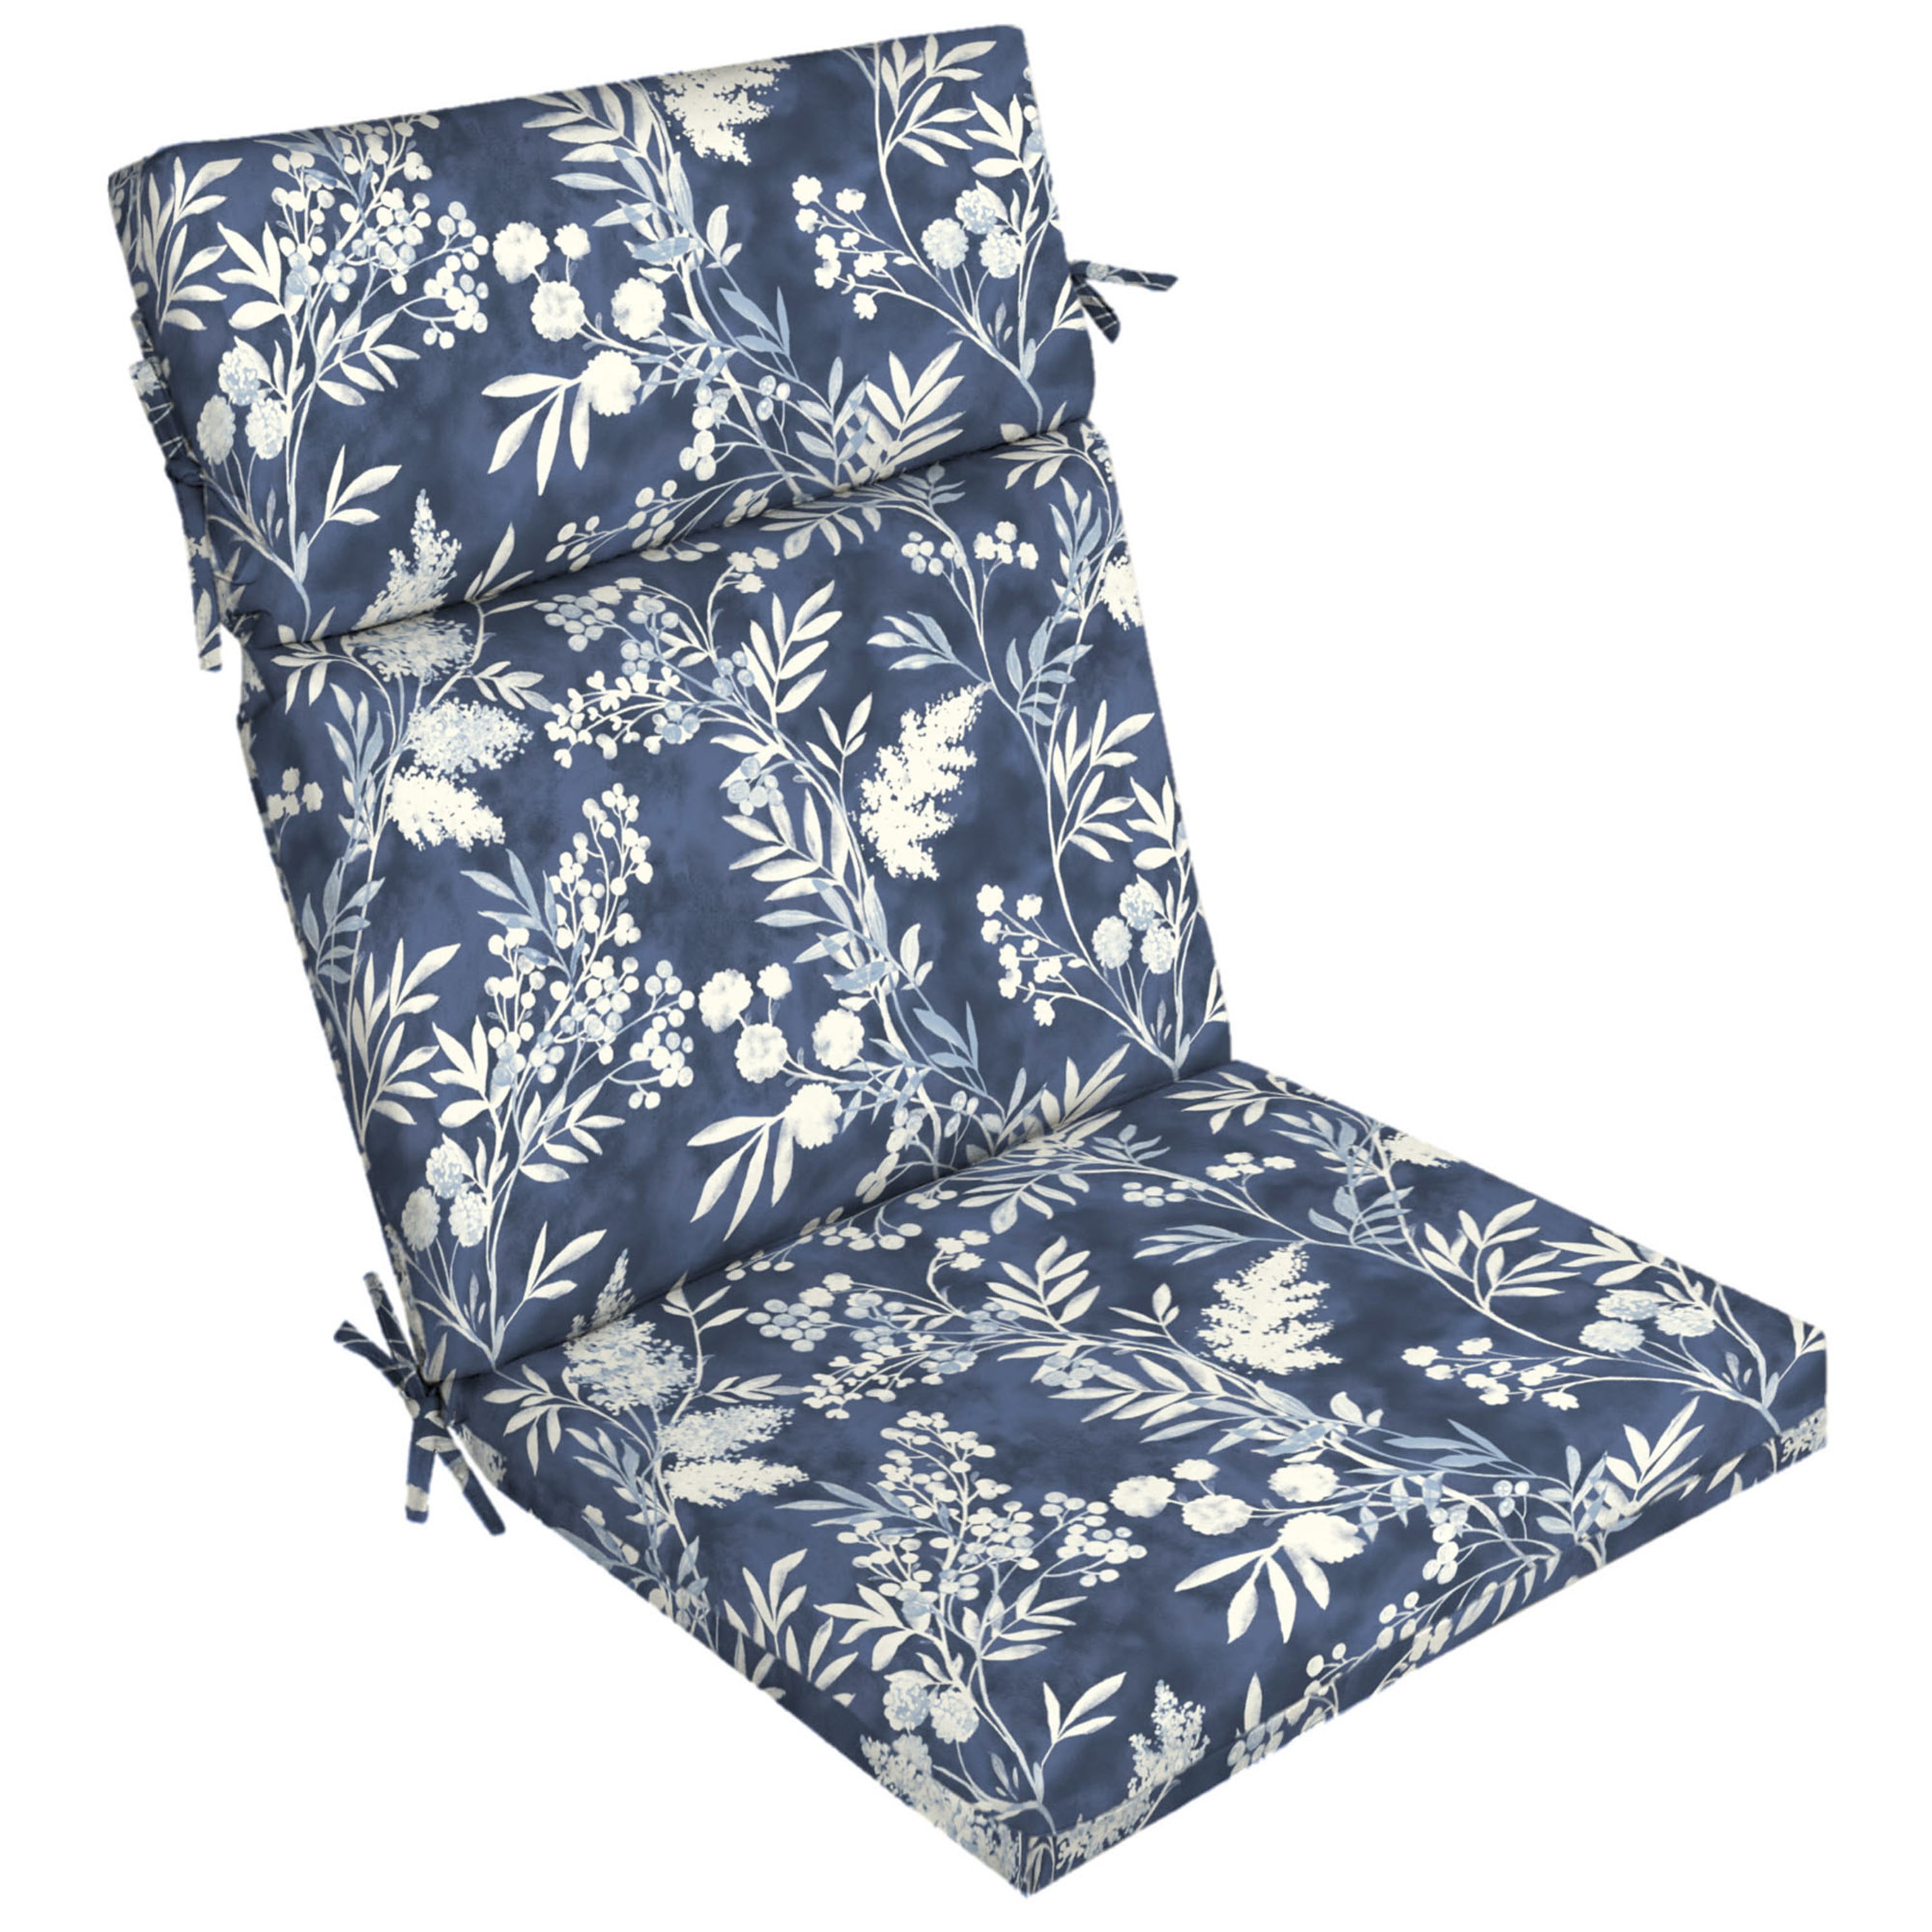 Better Homes & Gardens 44" x 21" Navy Blue Floral Outdoor Chair Cushion, 1 Piece